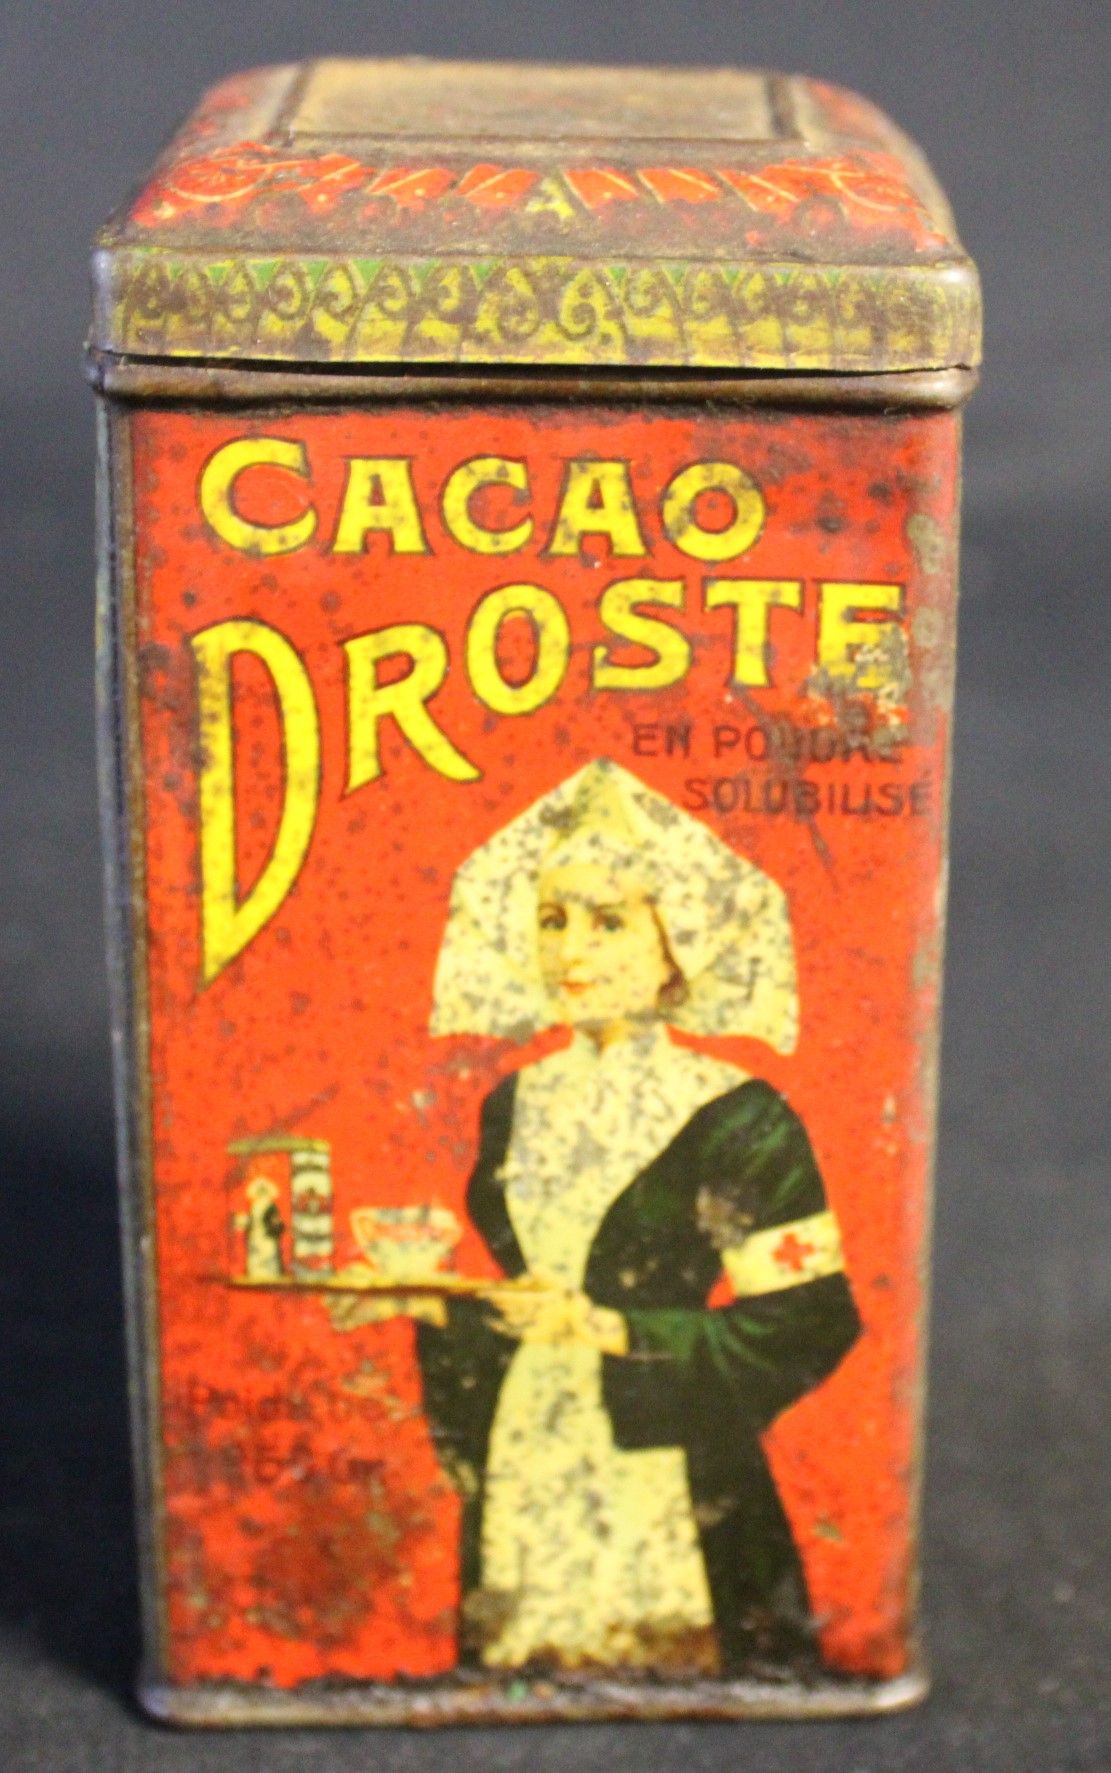 Null 铁盒 "DROSTE CACAO"，磨损，12x6